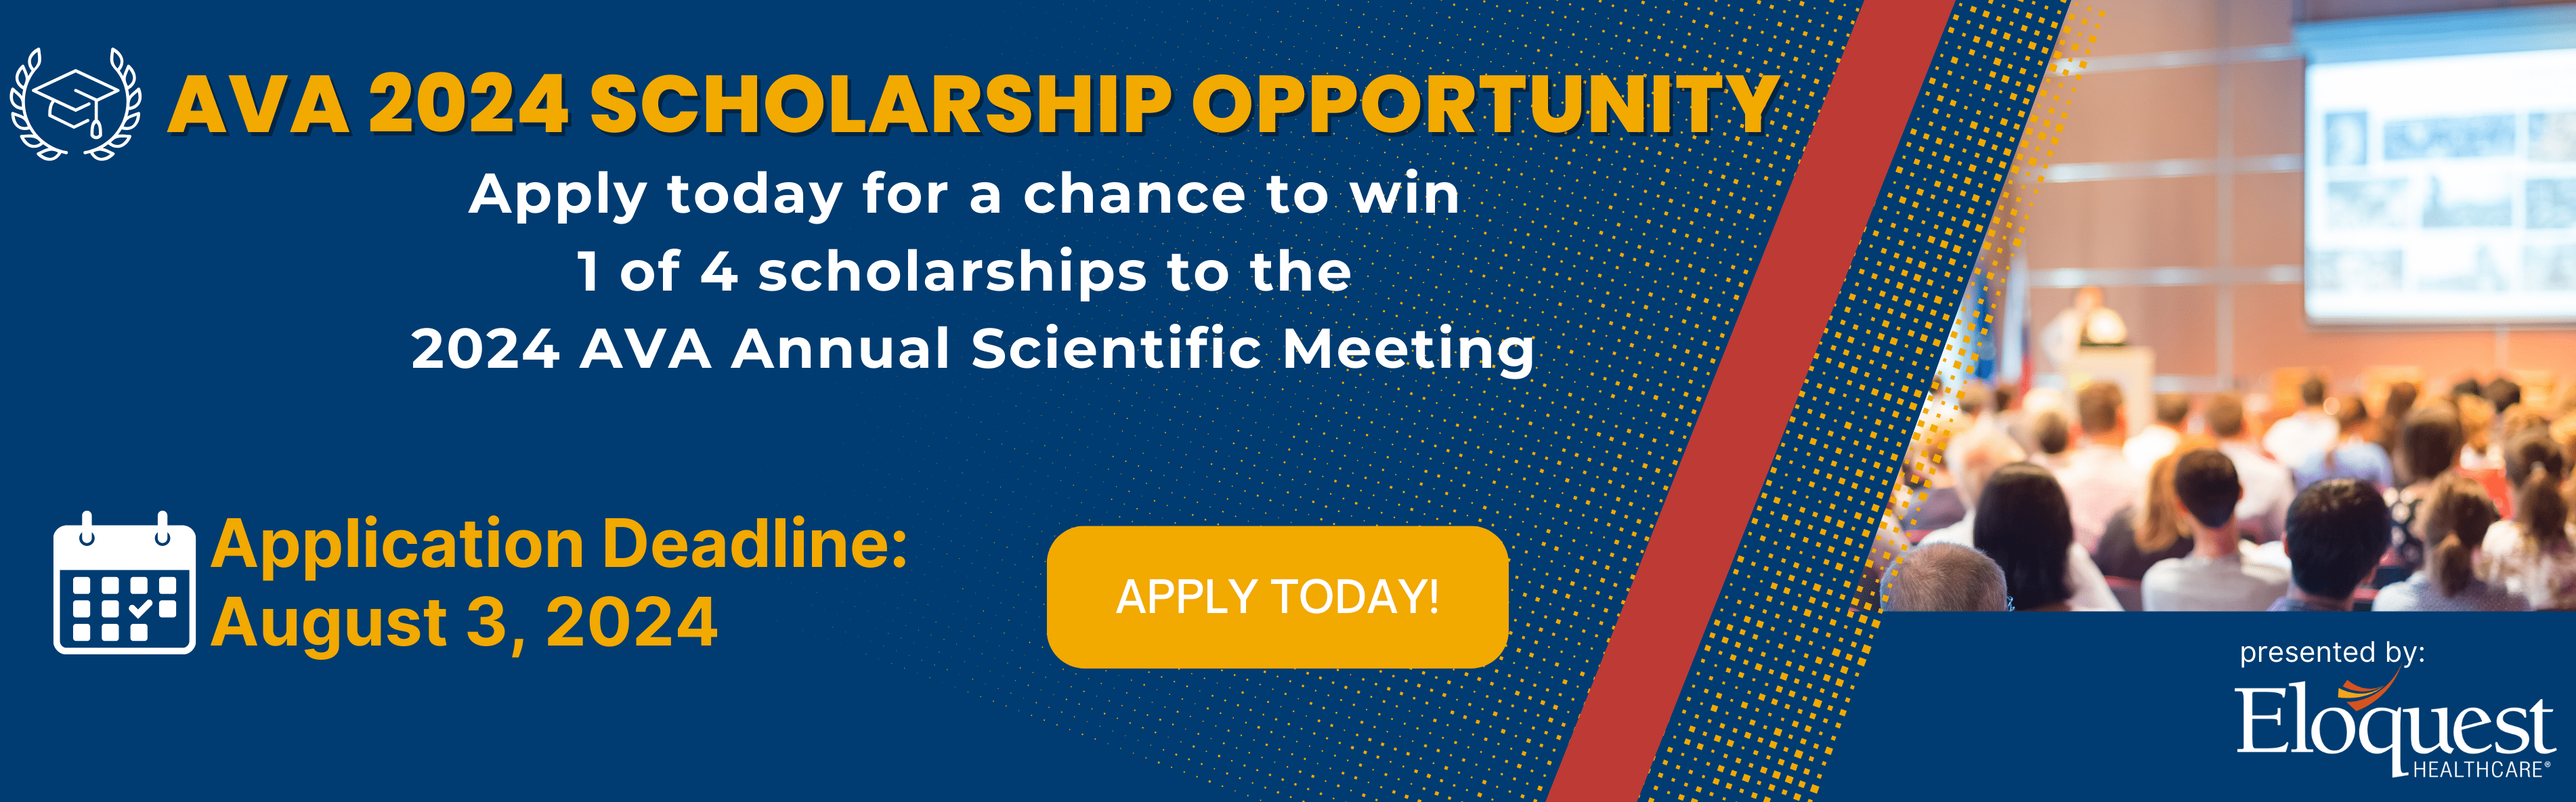 Invitation to apply for a chance to receive 1 of 4 scholarships to the AVA 2024 Annual Scientific Meeting